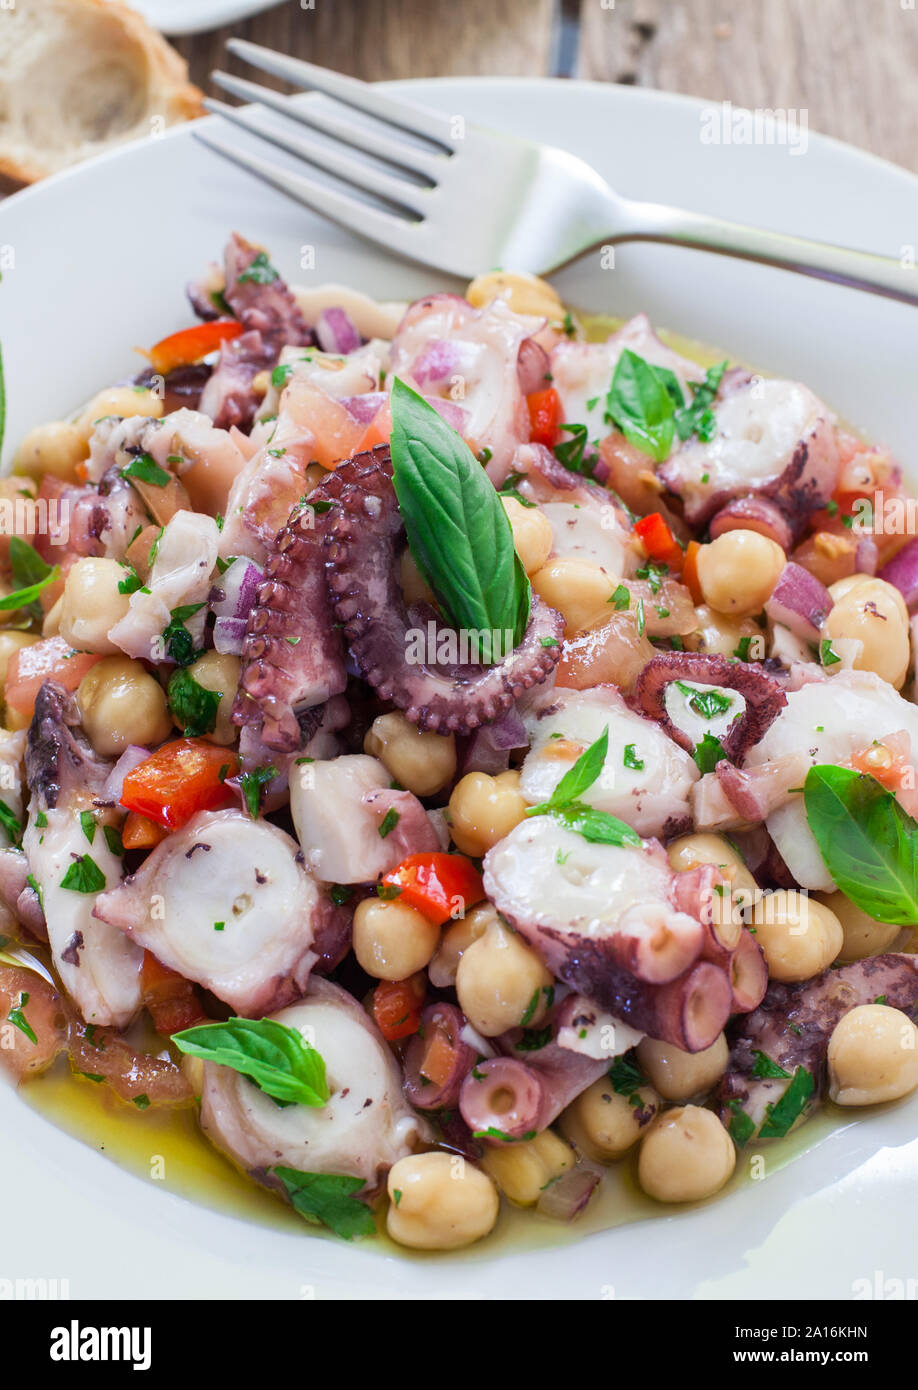 healthy octopus and chickpeas salad with veggies Stock Photo